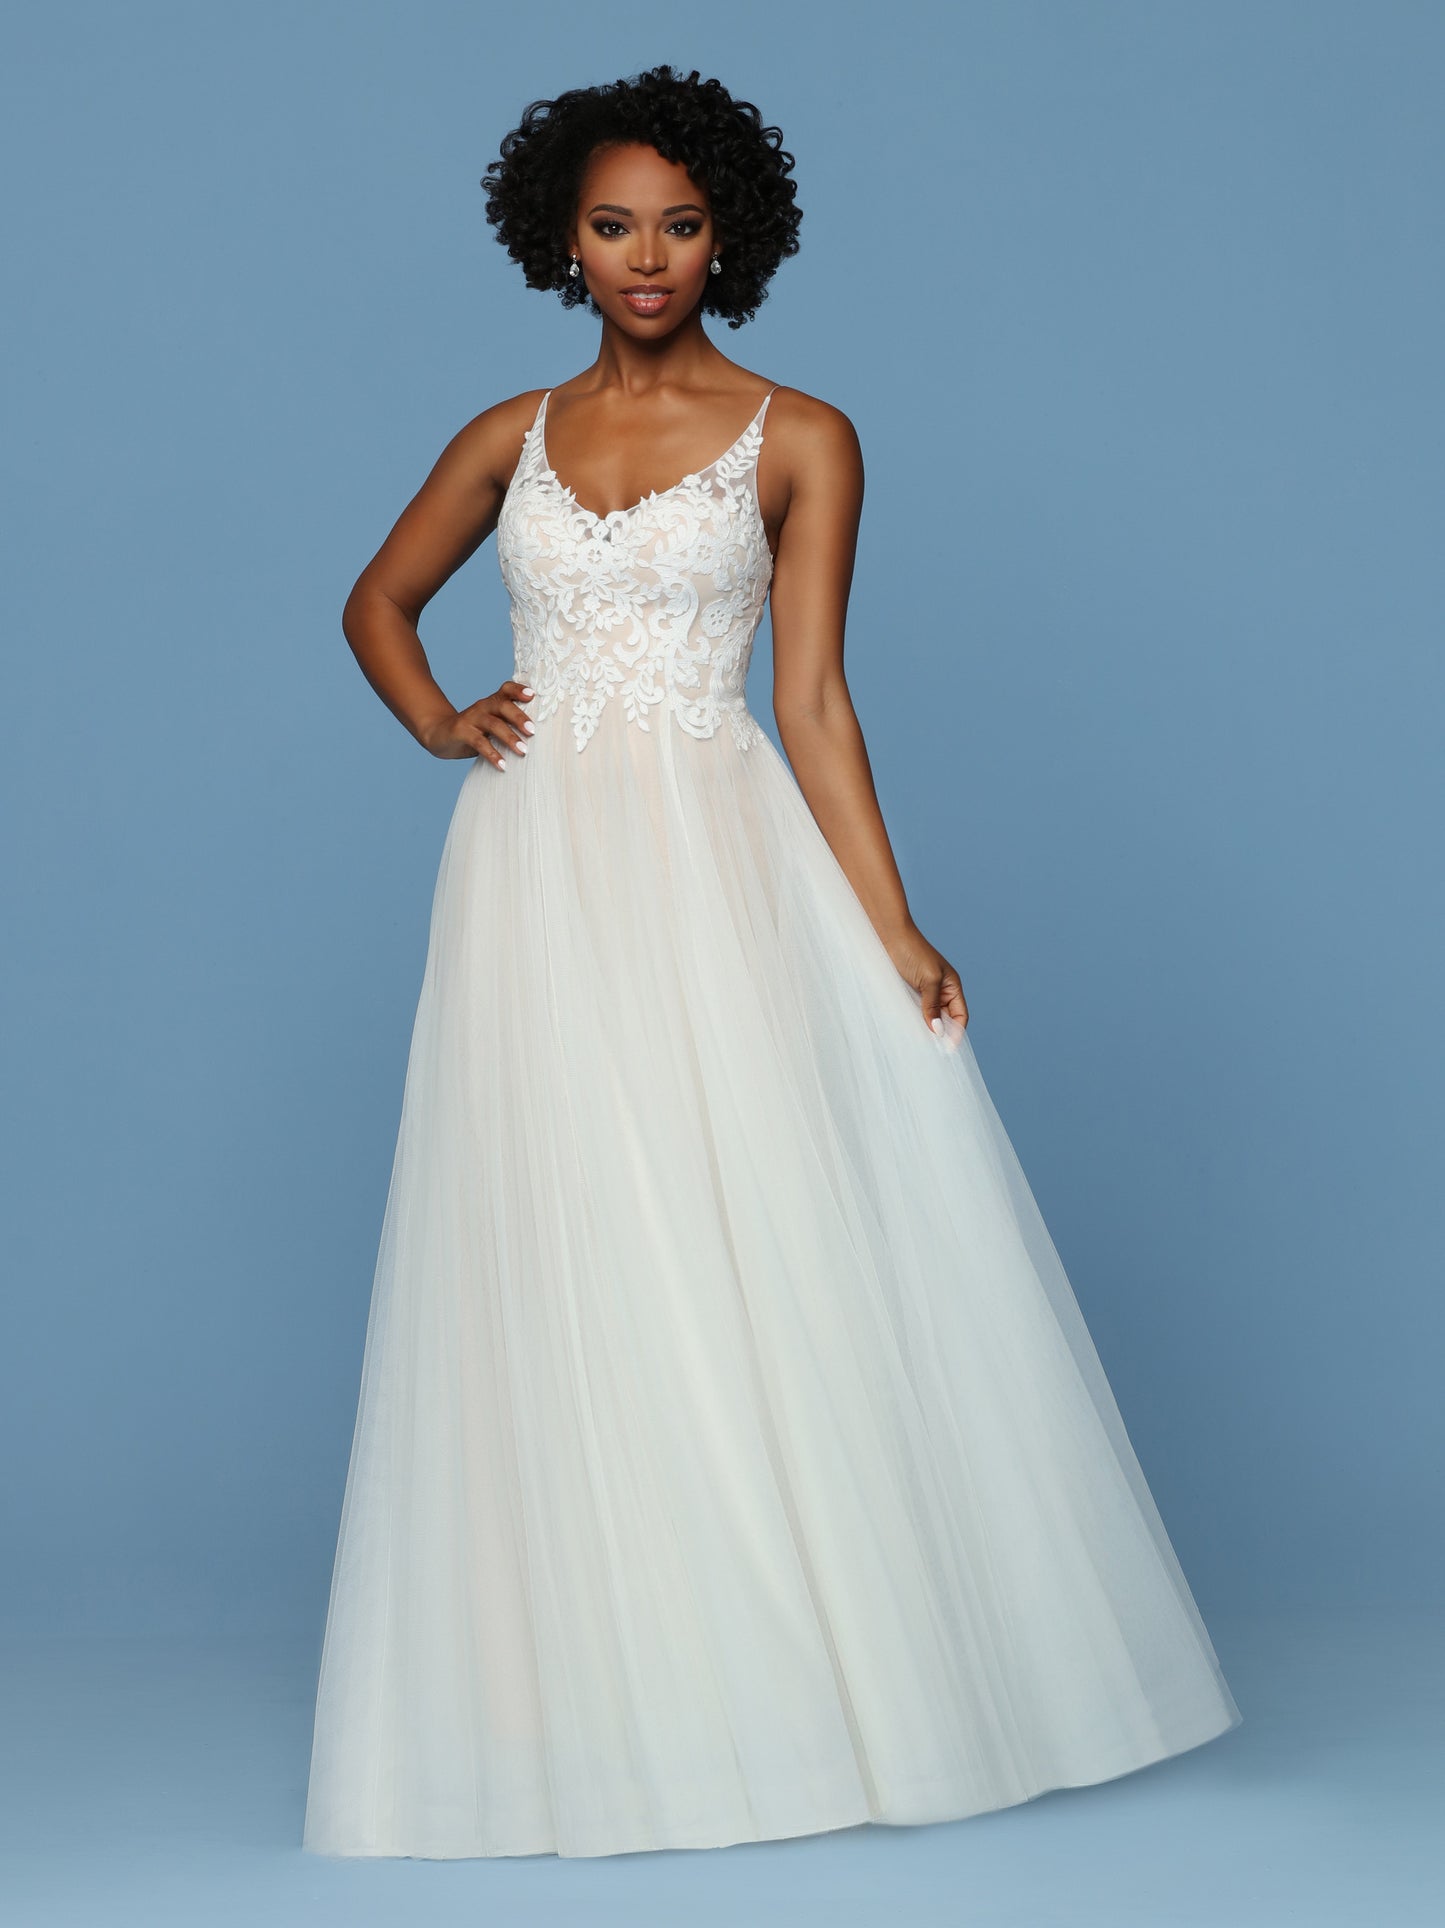 Davinci Bridal 50552 This Gown Features a Lace Bodice with an Sweetheart Illusion V neckline and sheer lace straps leading to an open v back. Lush soft tulle skirt with lace cascading from the bodice and a small train.  Available for 1-2 Week Delivery!!!  Available Sizes: 2,4,6,8,10,12,14,16,18,20  Available Colors: Ivory/Ivory, Ivory/Nude